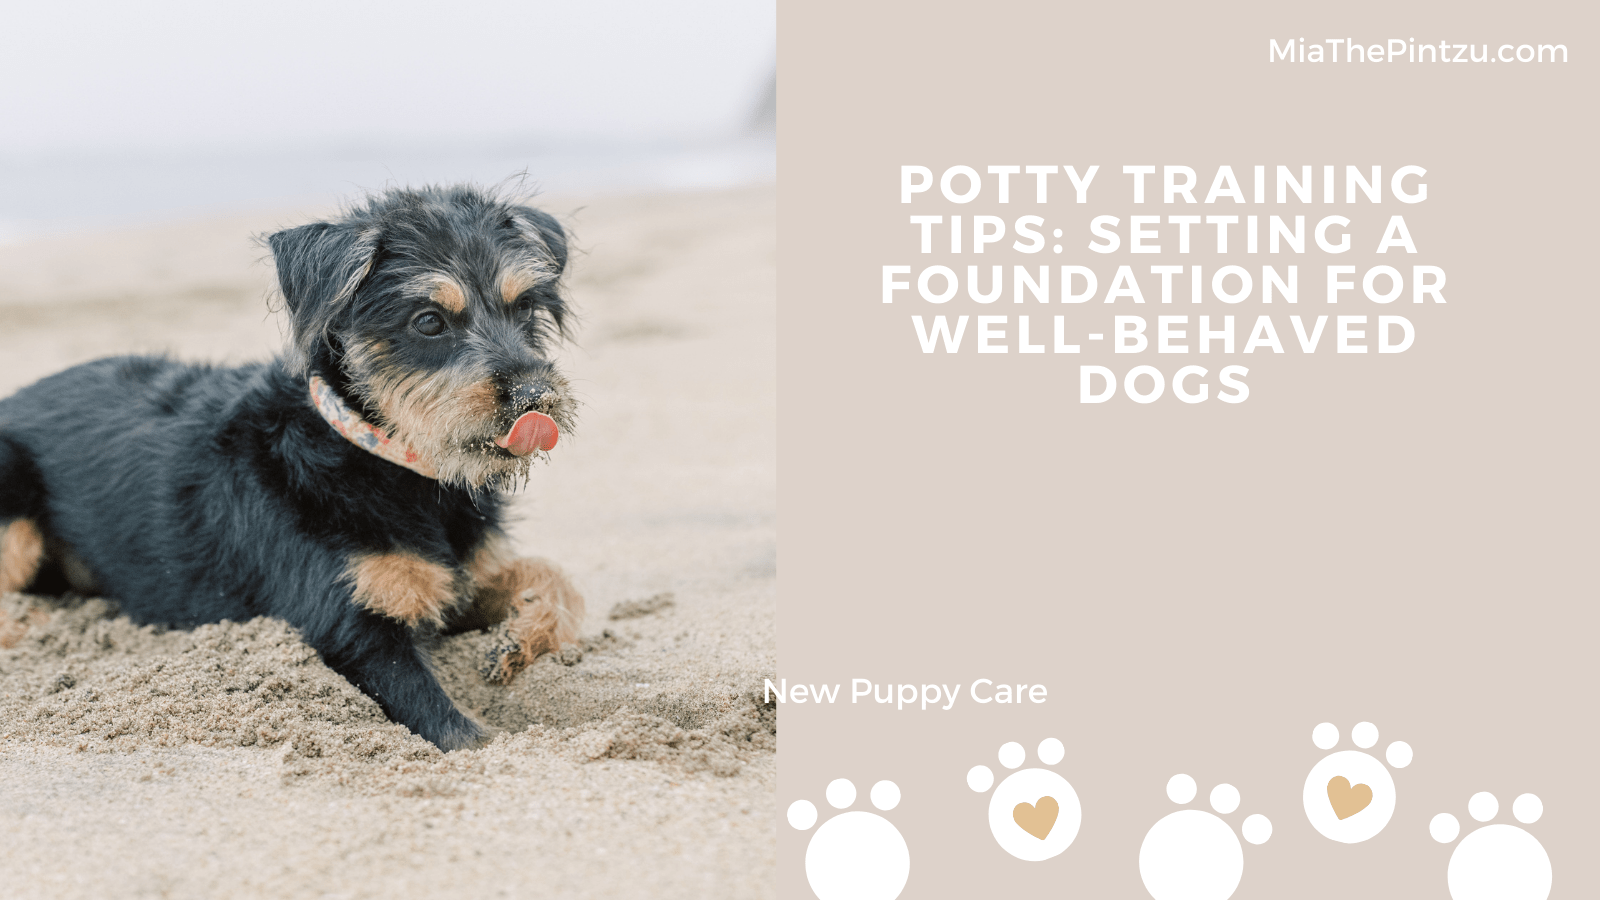 Potty Training Tips: Setting a Foundation for Well-Behaved Dogs